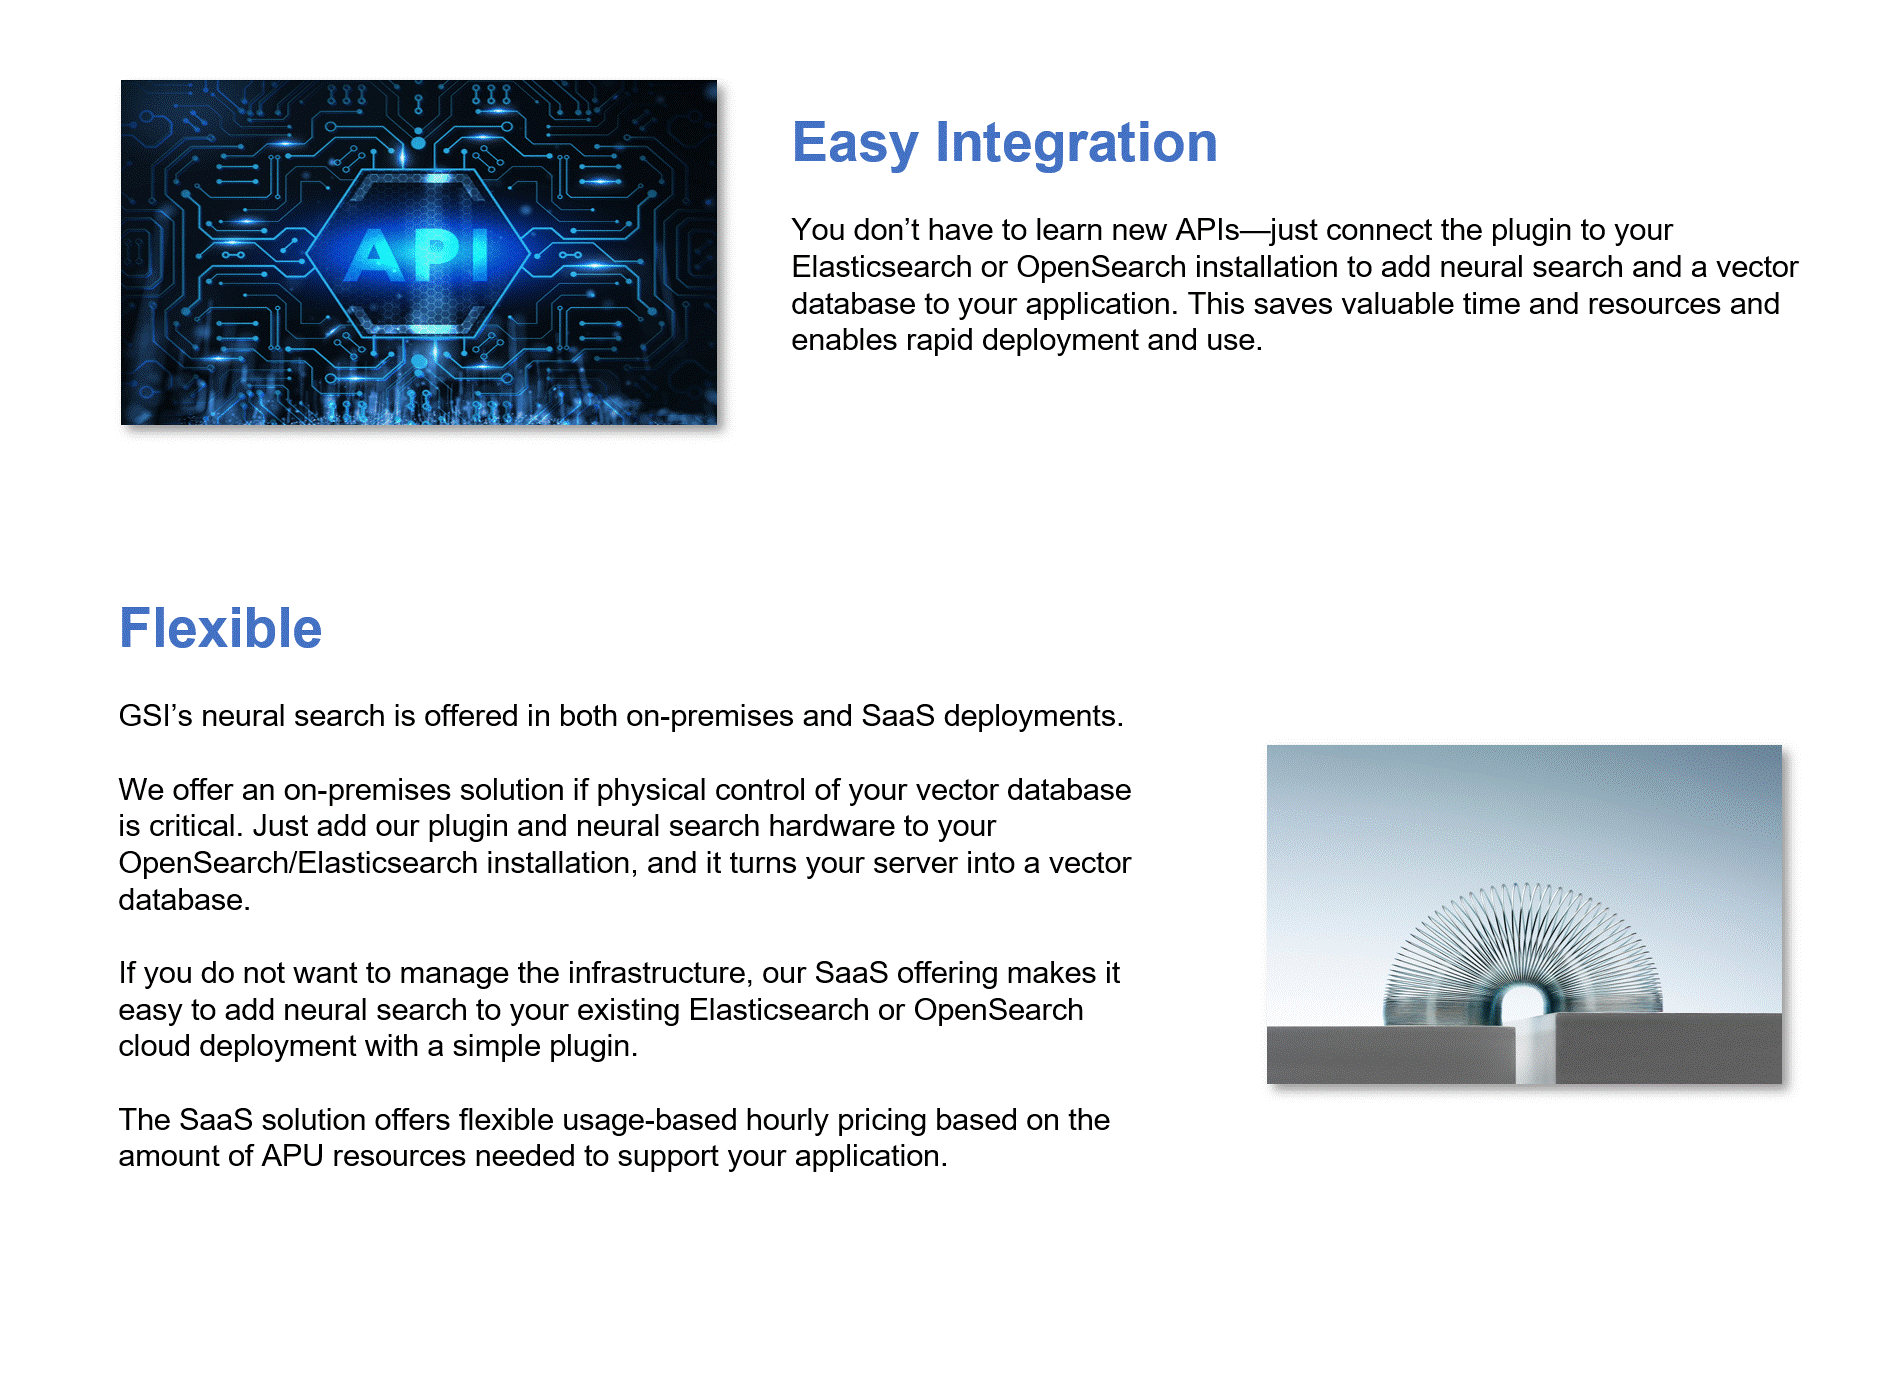 Neural Search Simplified...Easy Integration and Flexibility